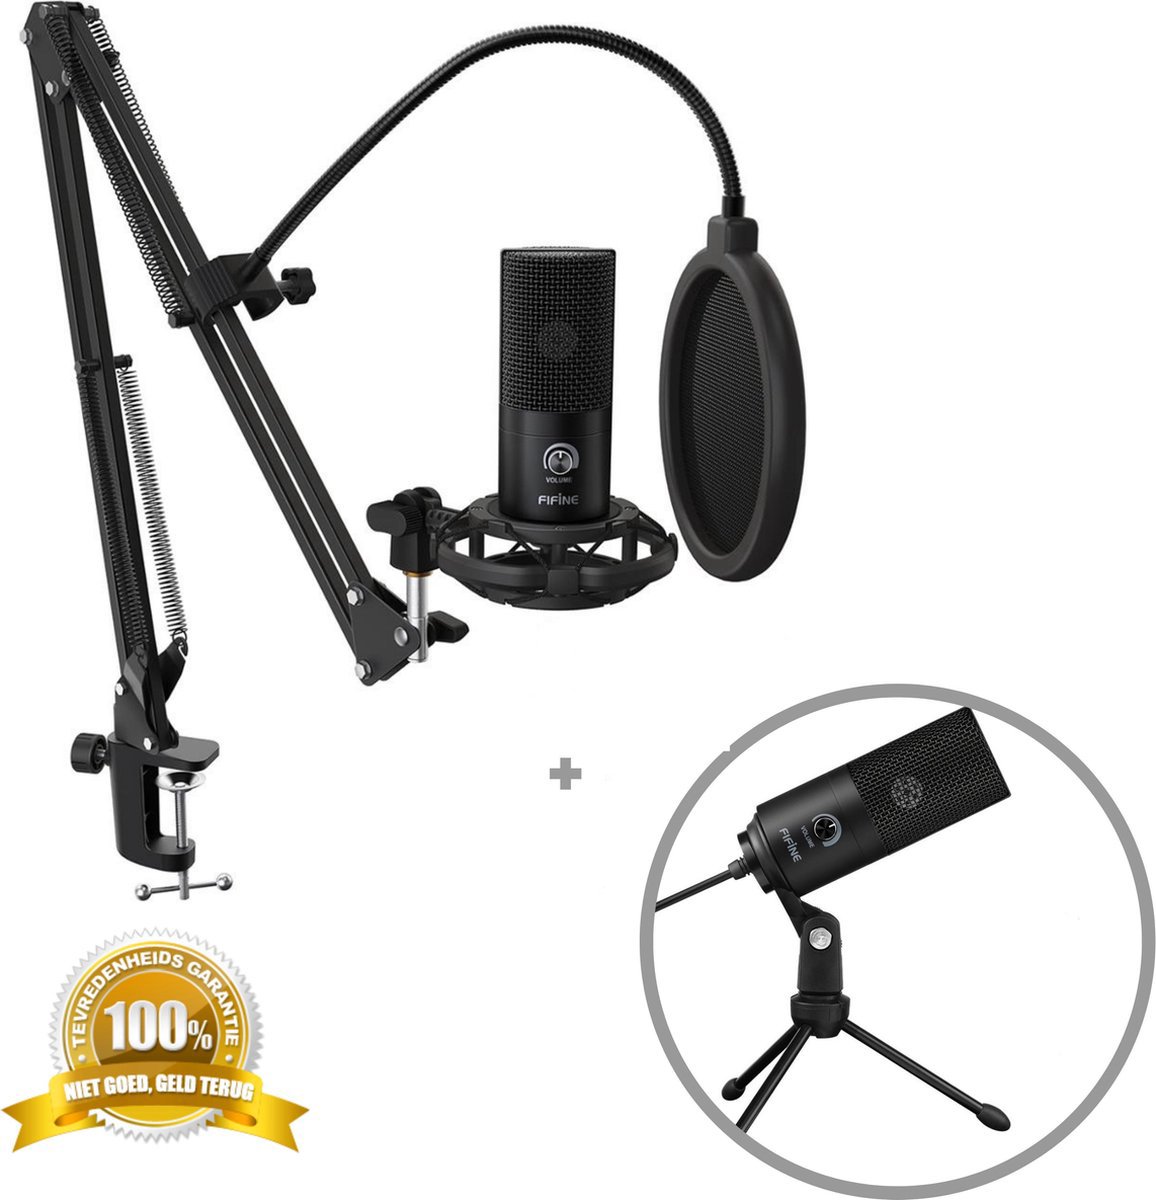 Fifine T669 - USB Microfoon met statief met driepoot - Microfoon met standaard - Podcast microfoon - Studio microfoon - Streaming - Gaming - Game streamen - Voice-over microfoon - Video Call - PC - PS4 - Microfoon arm - Gaming microfoon